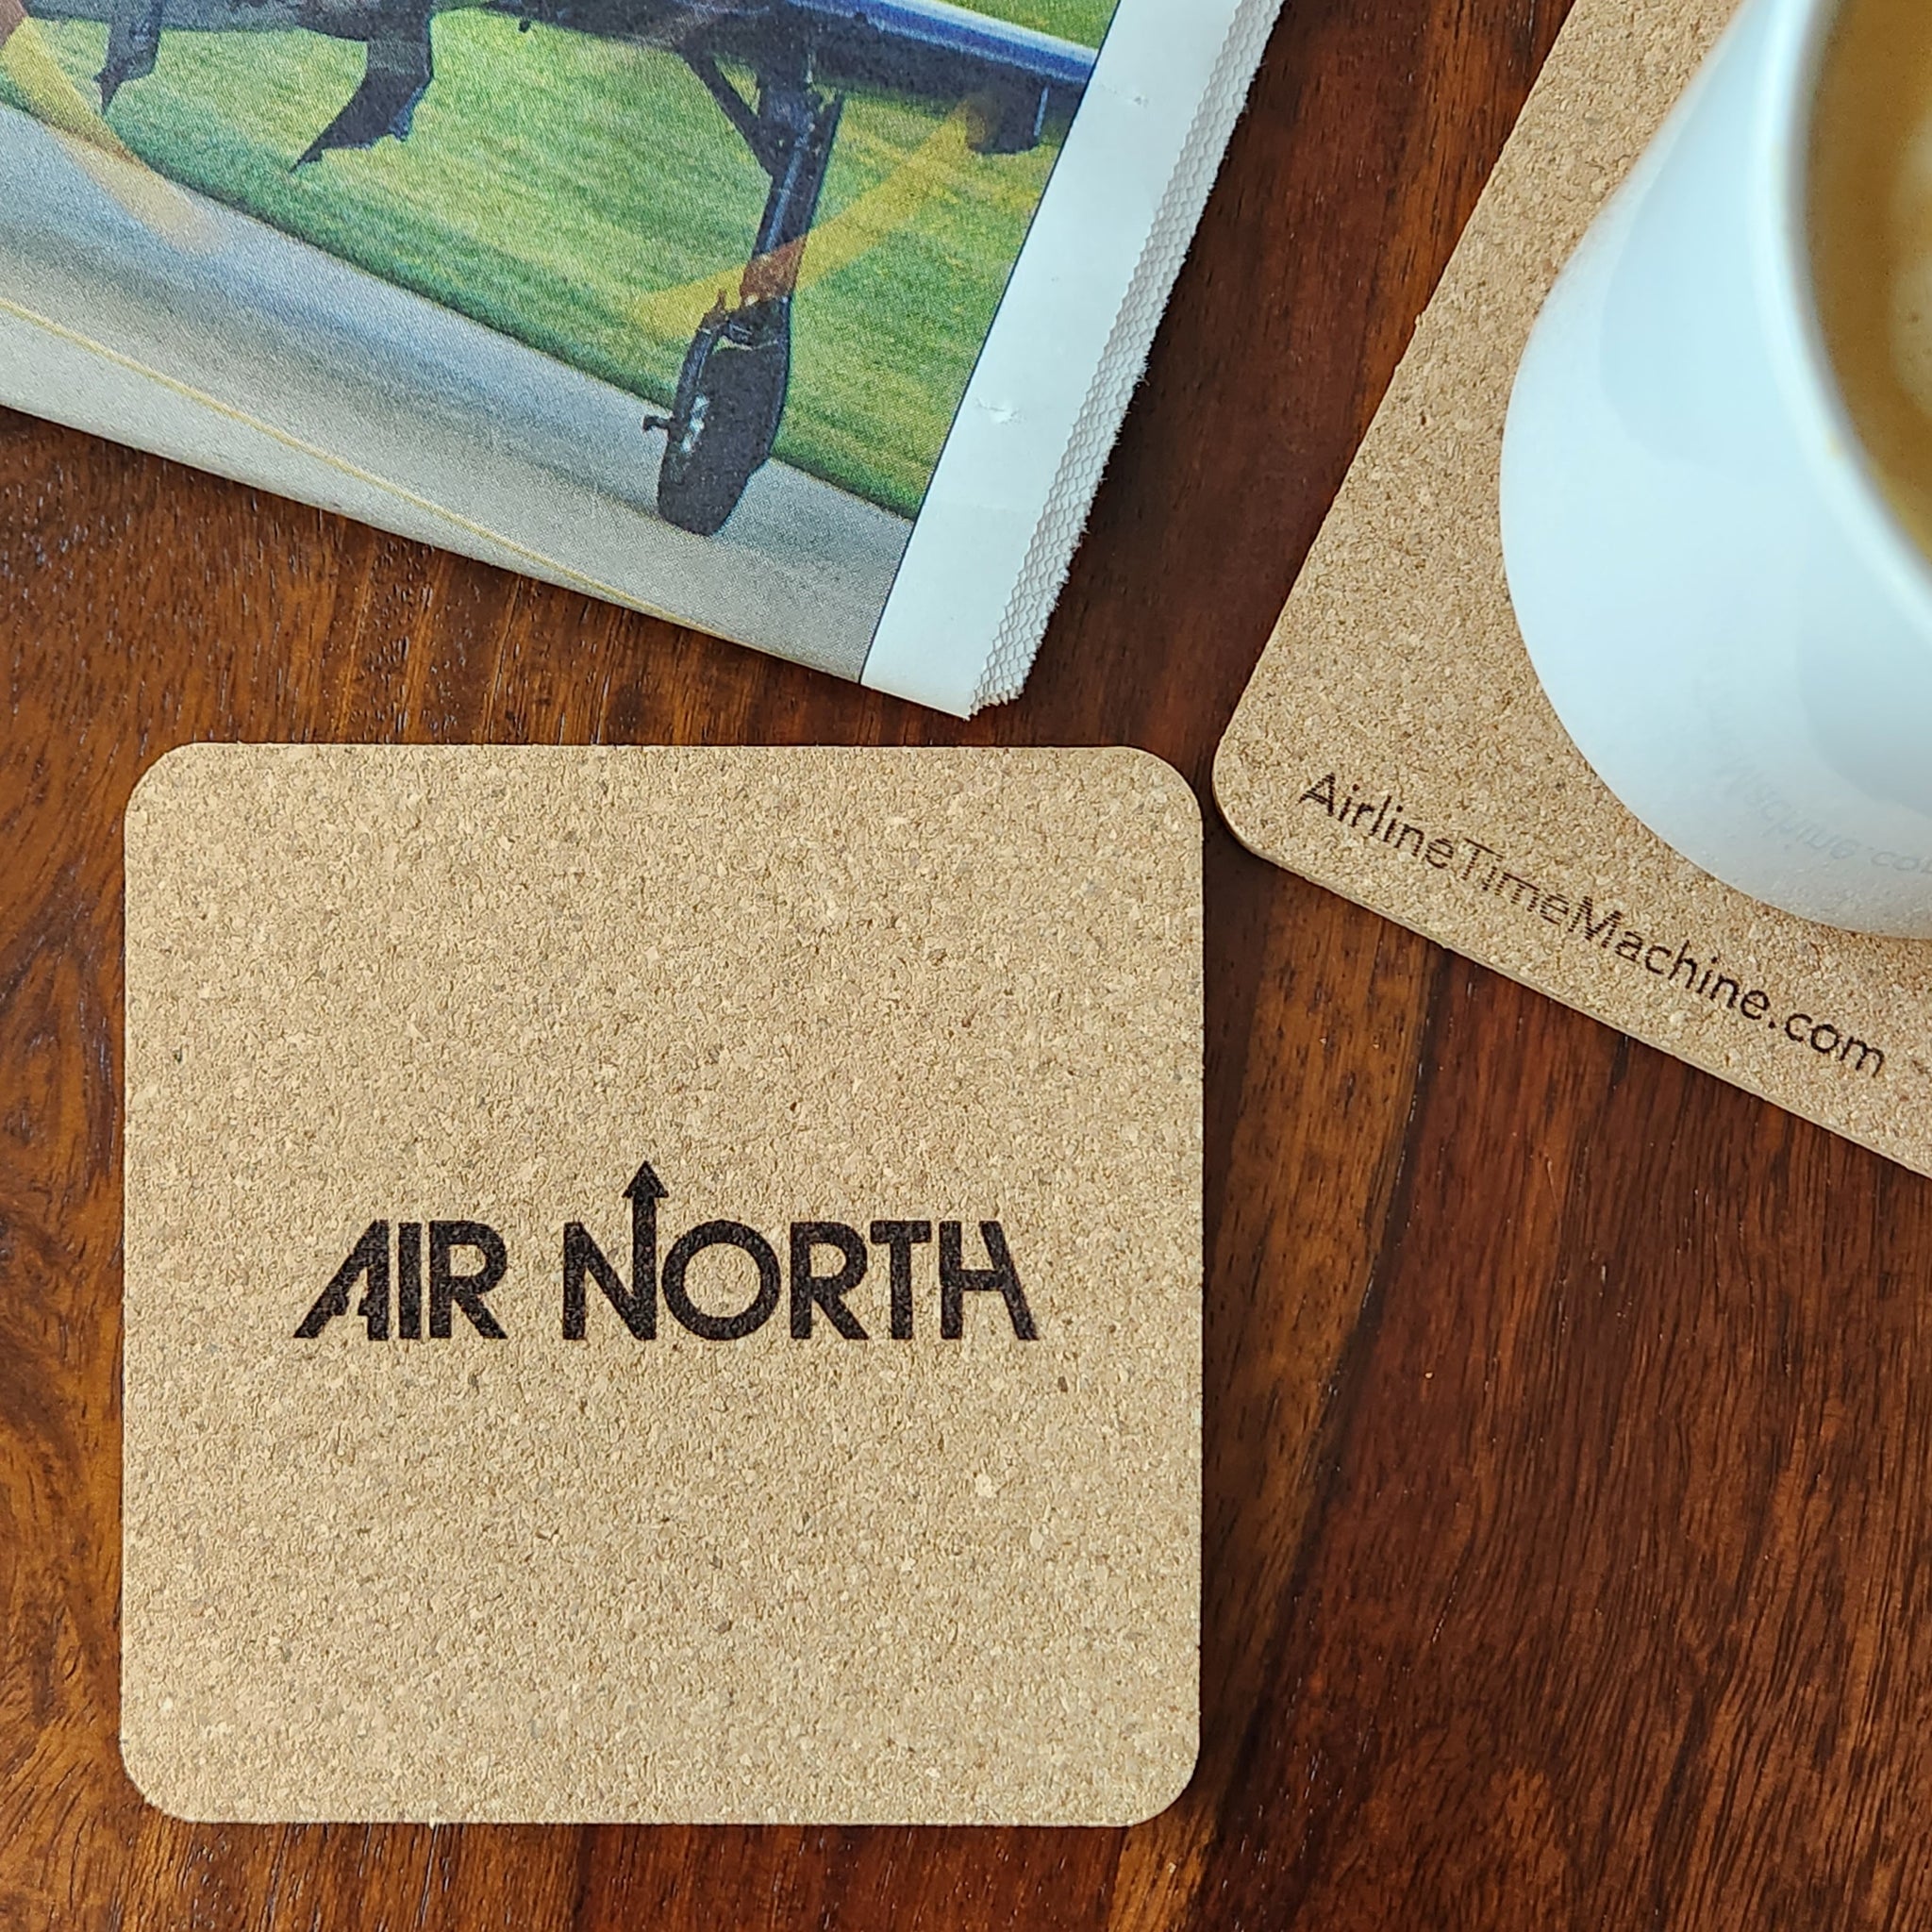 Image of cork coaster with Air North branding impression.